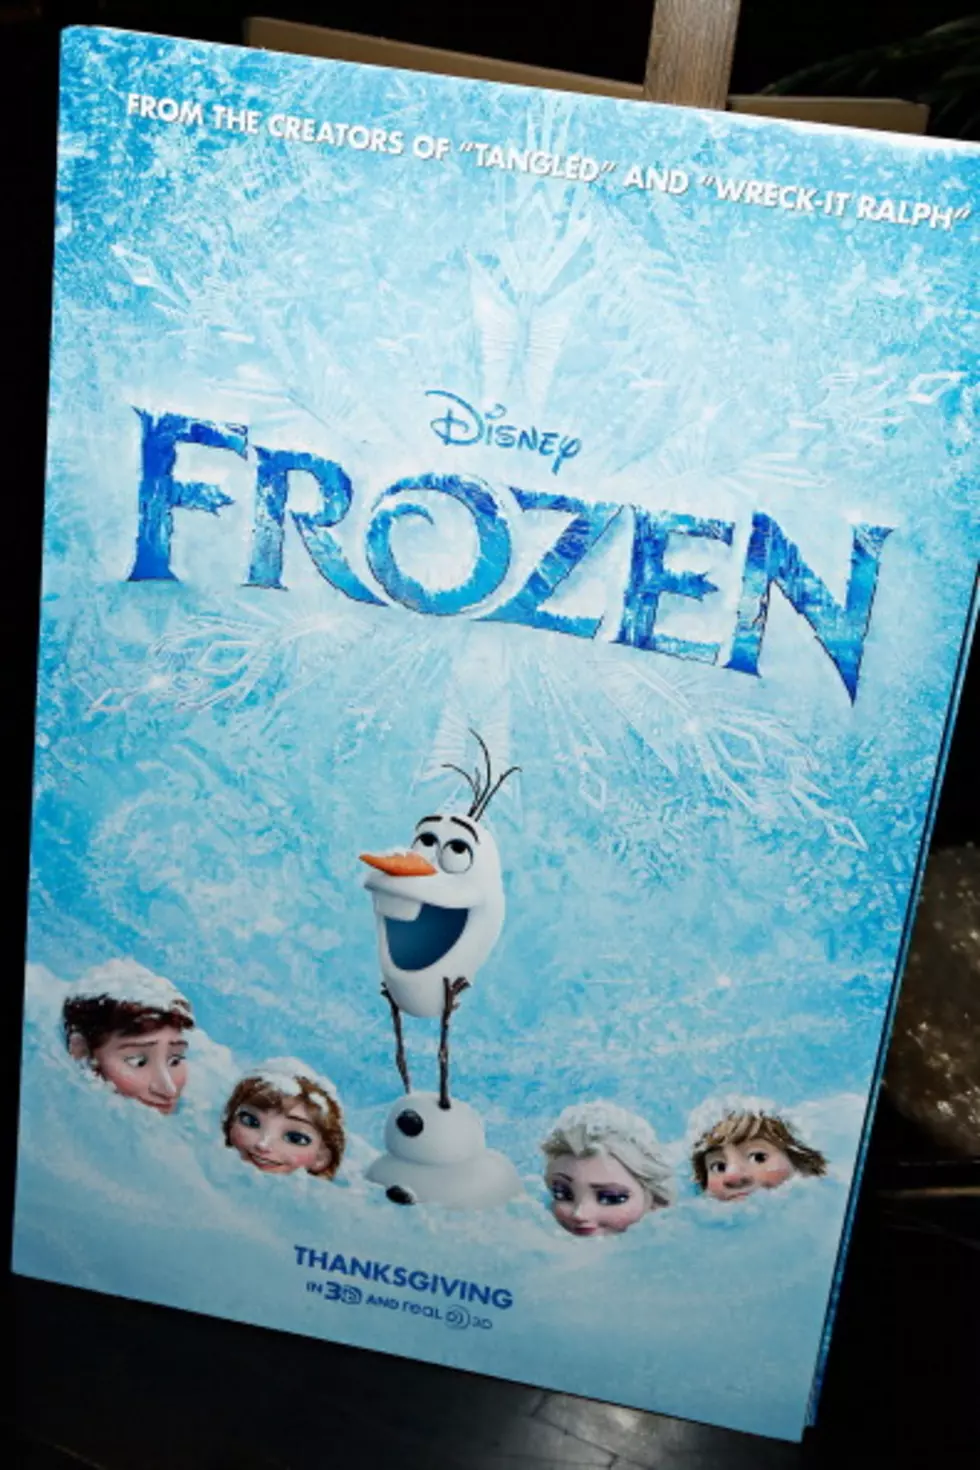 ‘Let it Go’ from ‘Frozen’ – Amazing Video of Singers Performing in 25 Languages [Watch]